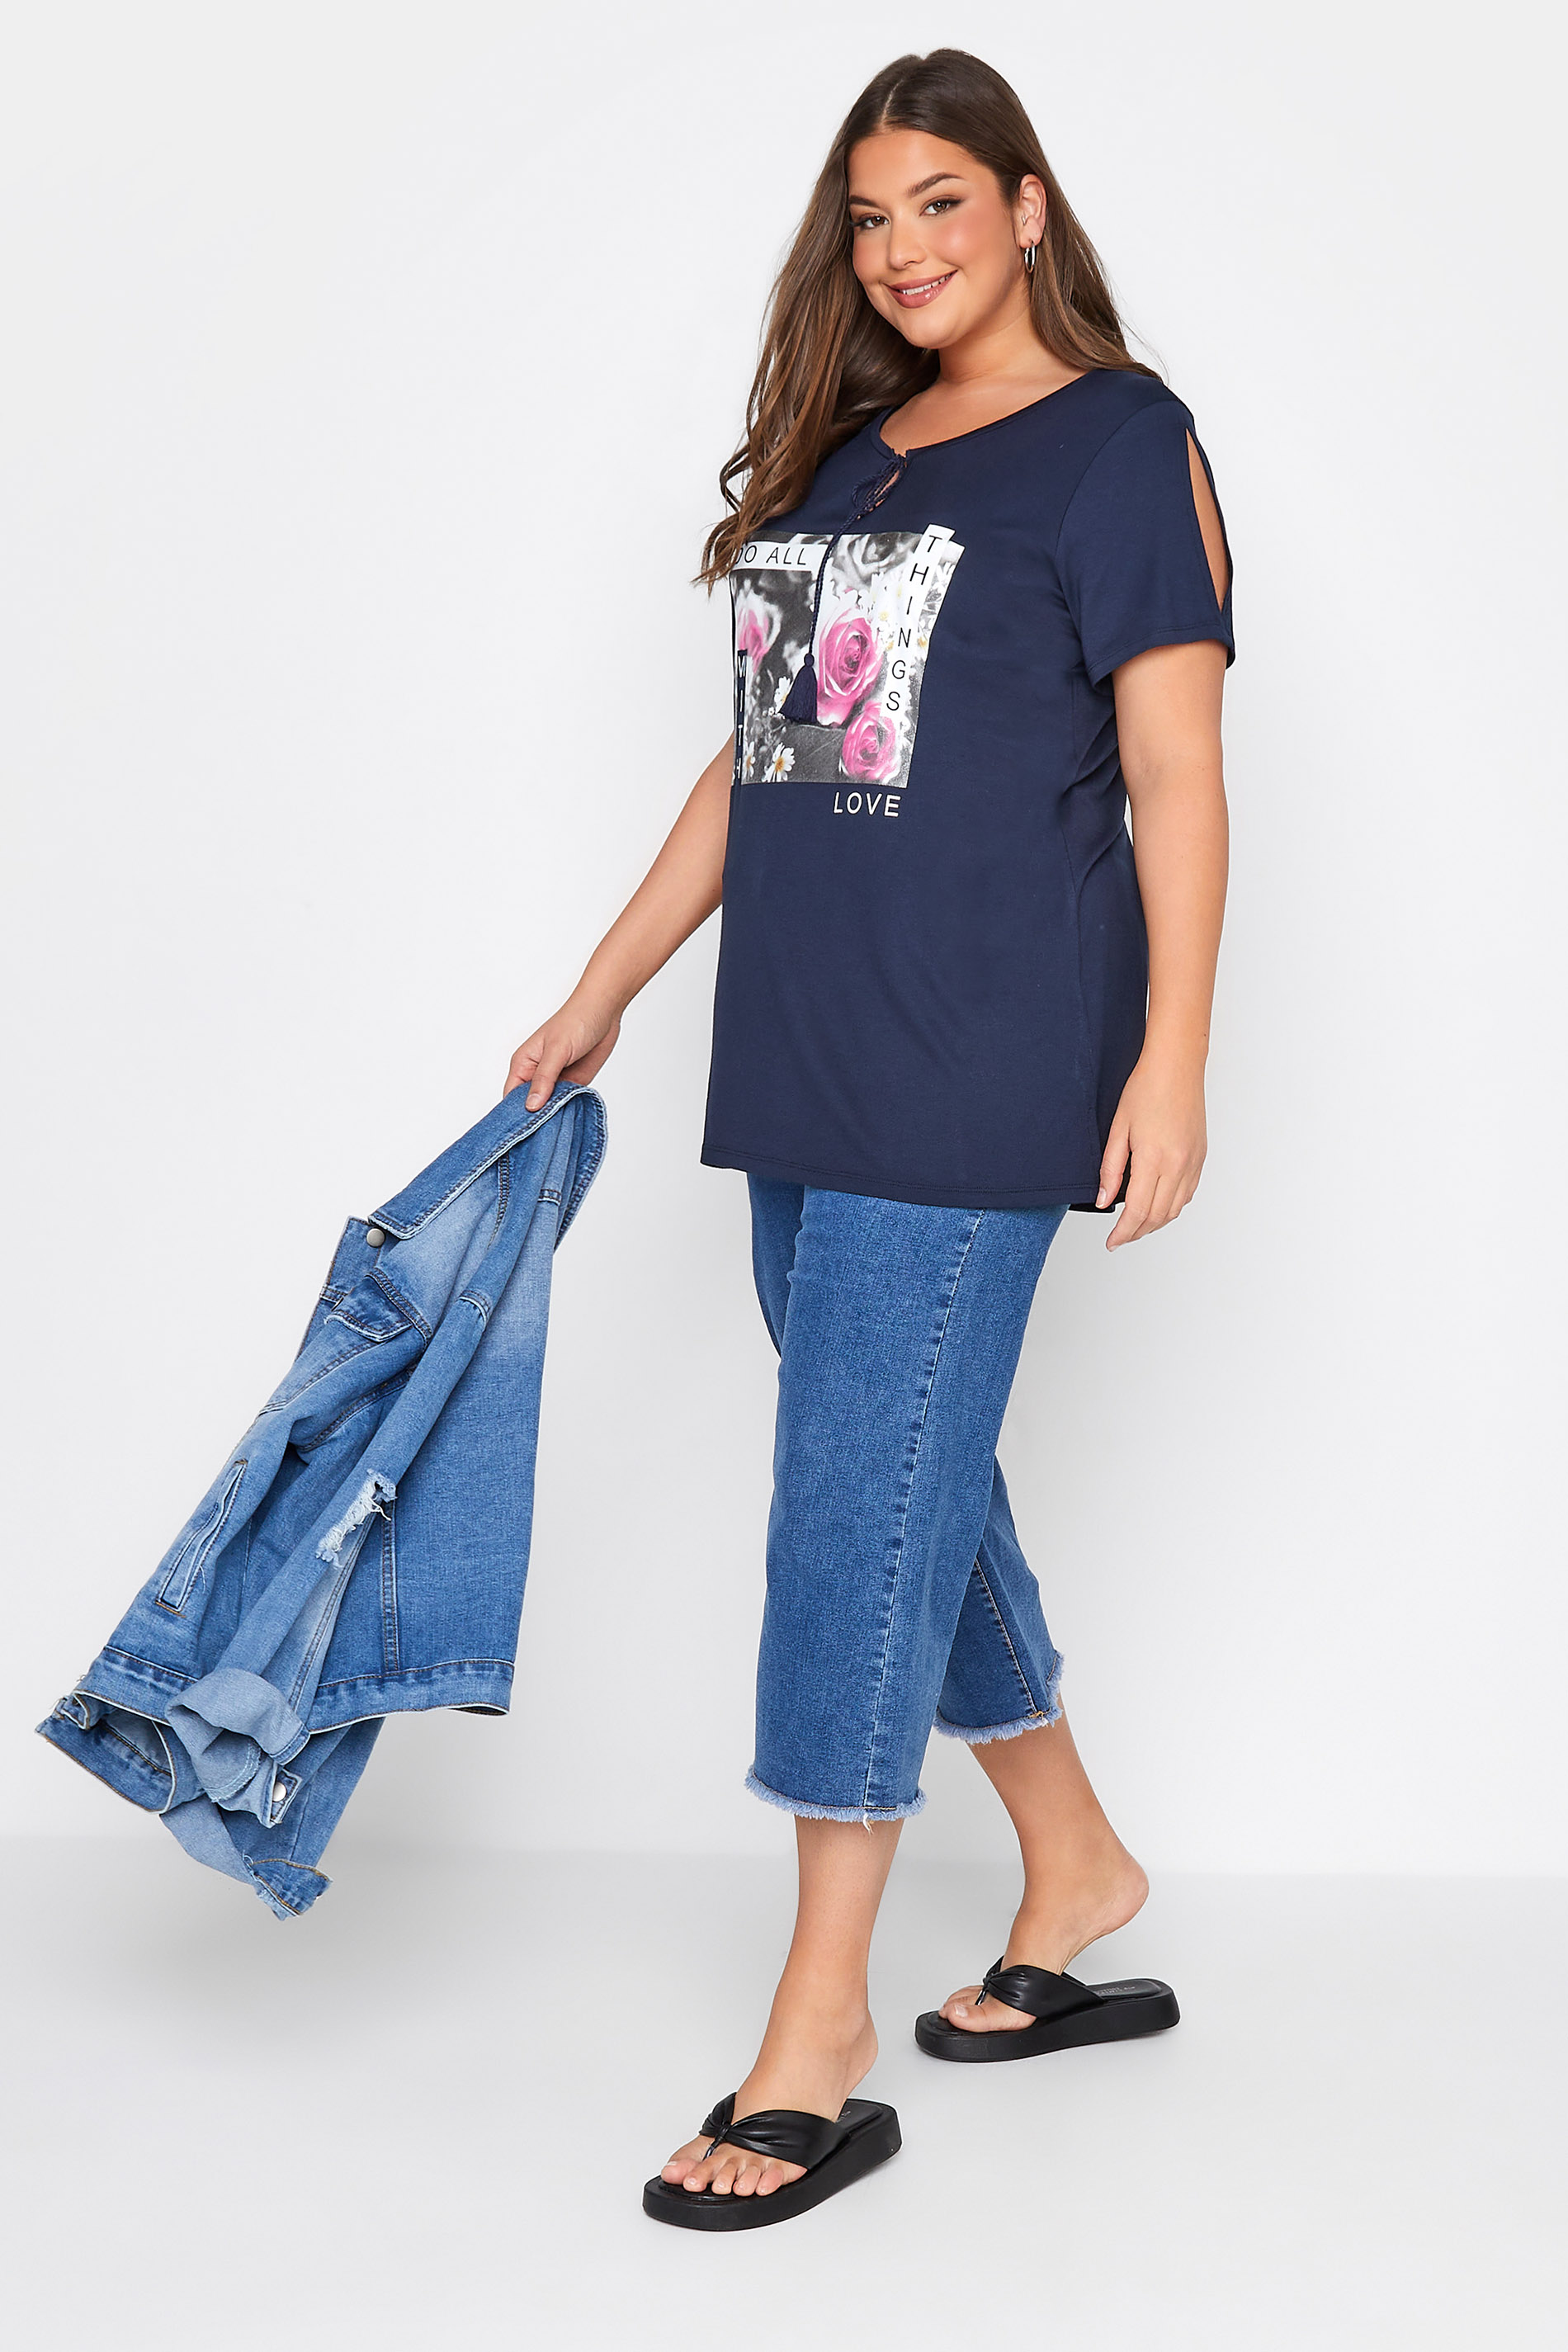 Grande taille  Tops Grande taille  Tops à Slogans | T-Shirt Bleu Marine Slogan 'All things with love' en Jersey - CE26248